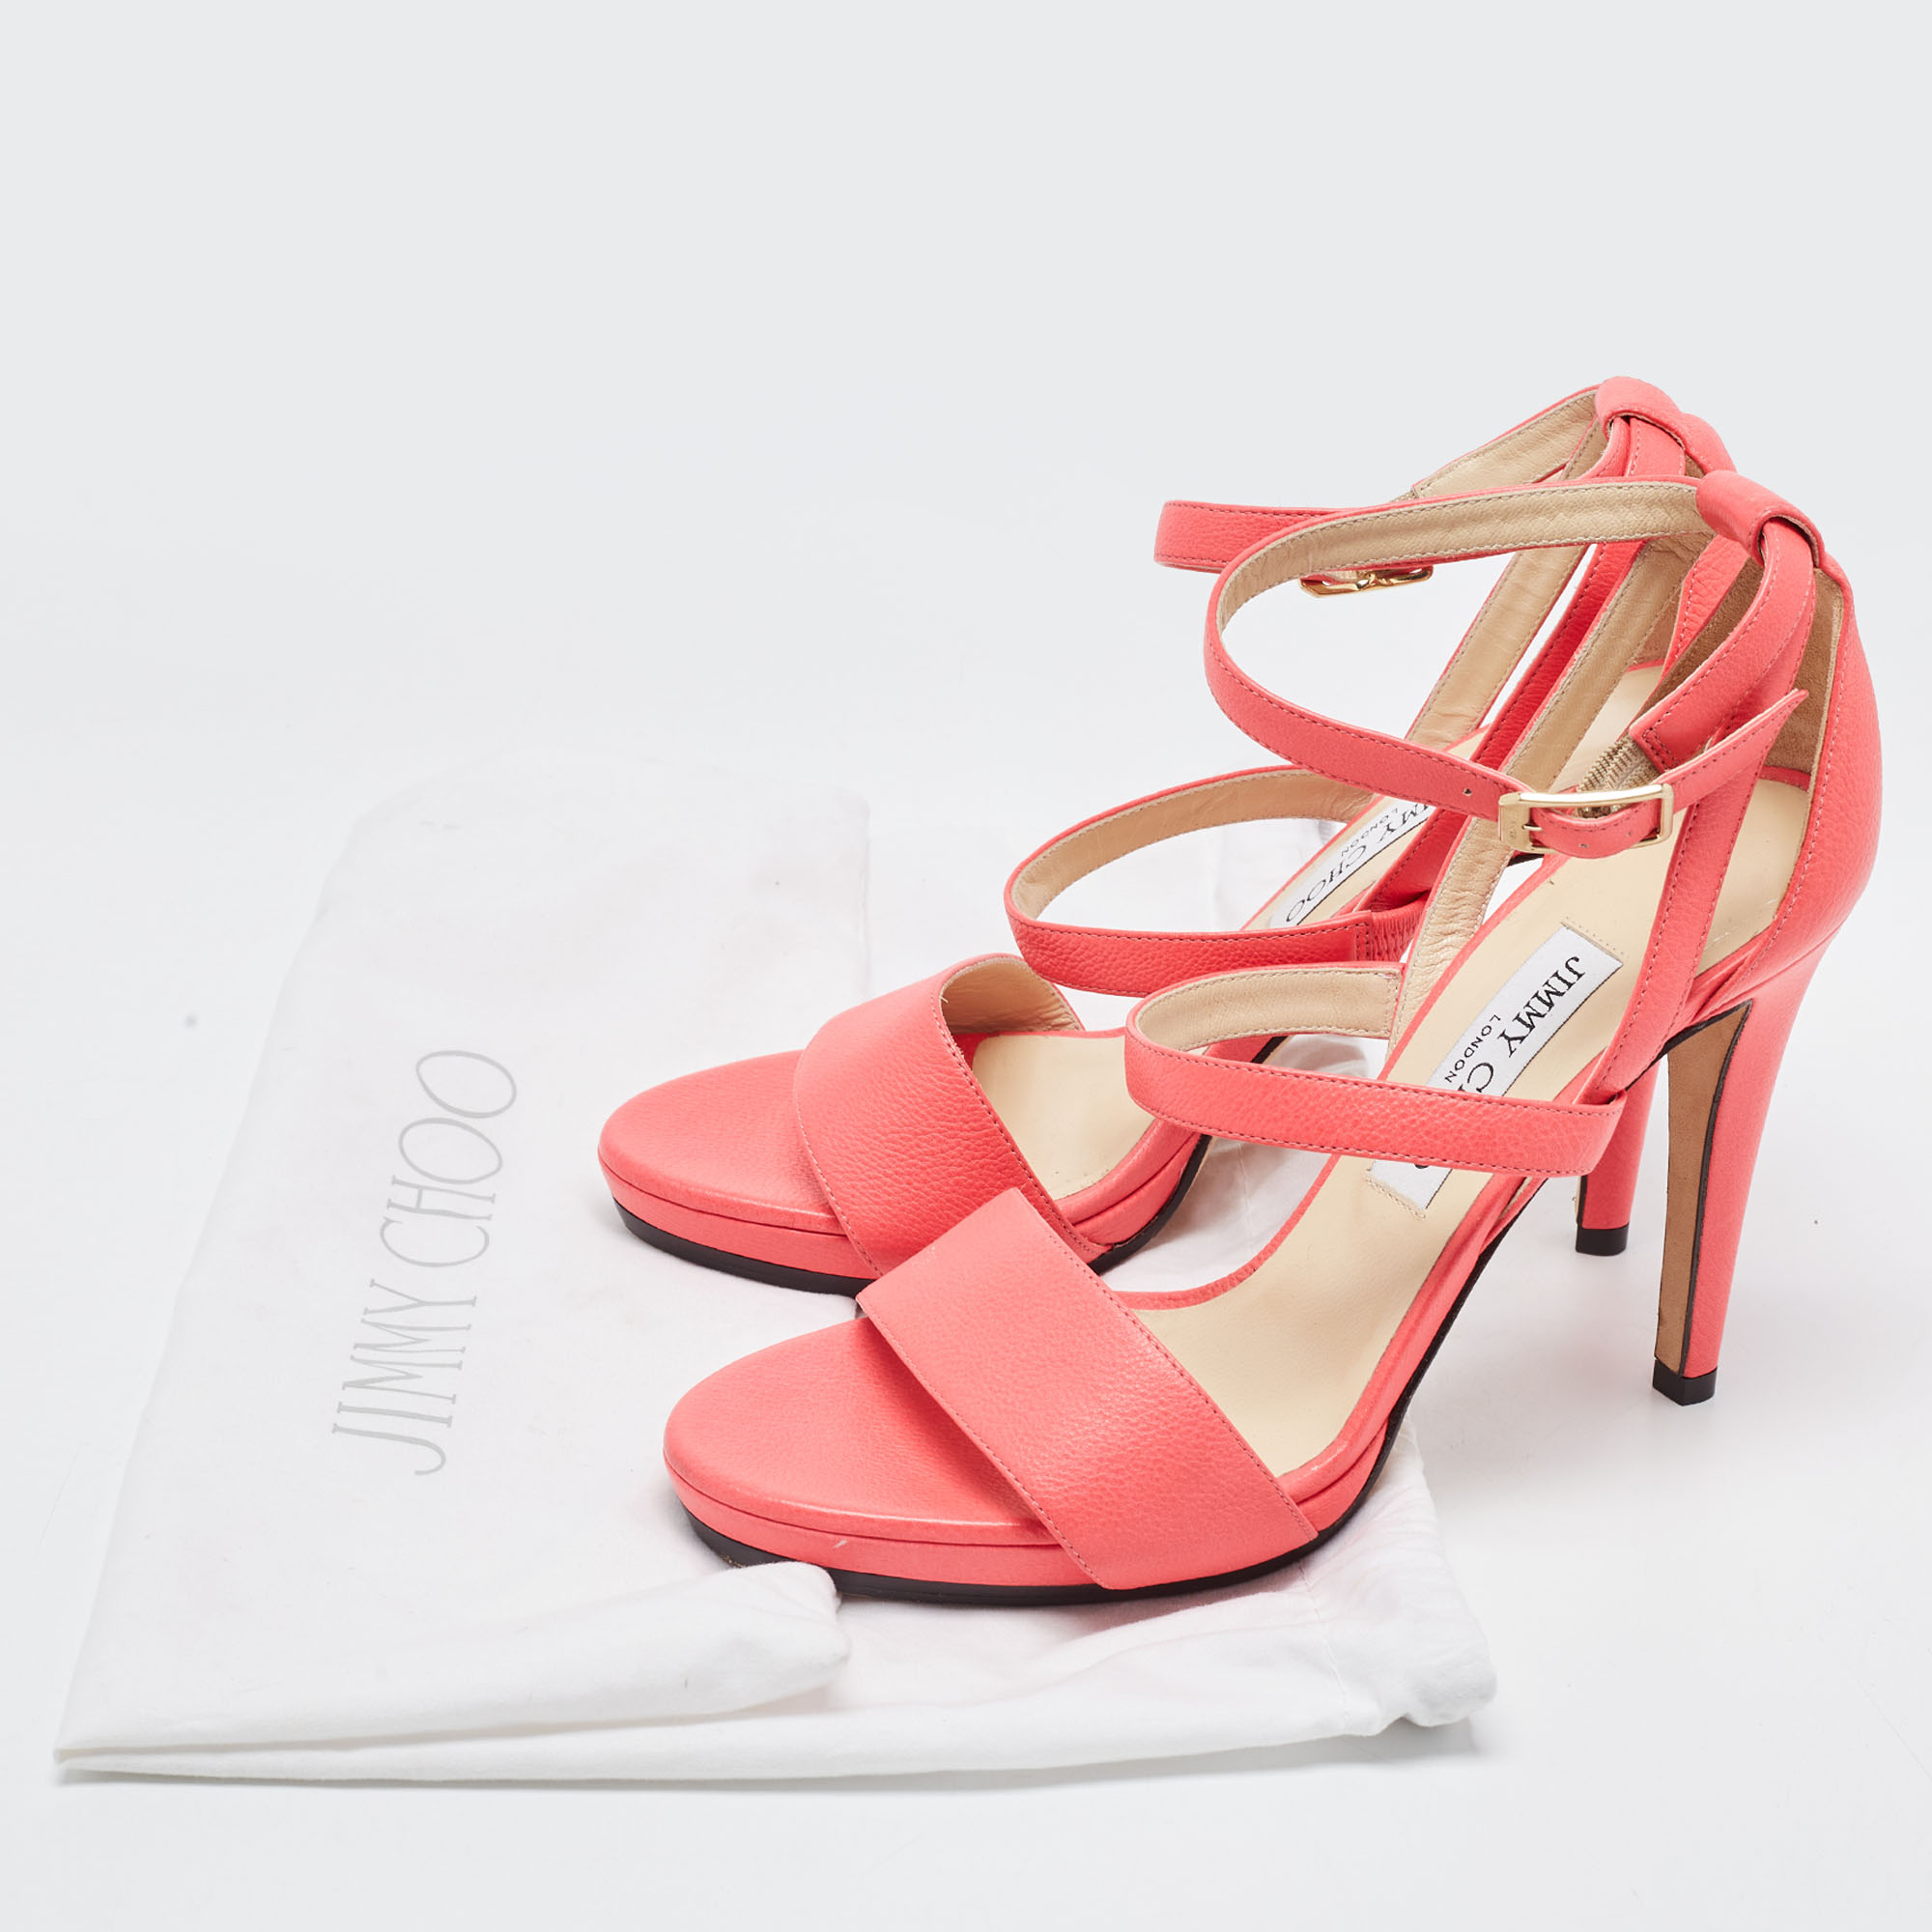 Jimmy Choo Neon Pink Leather Strappy Sandals Size 39